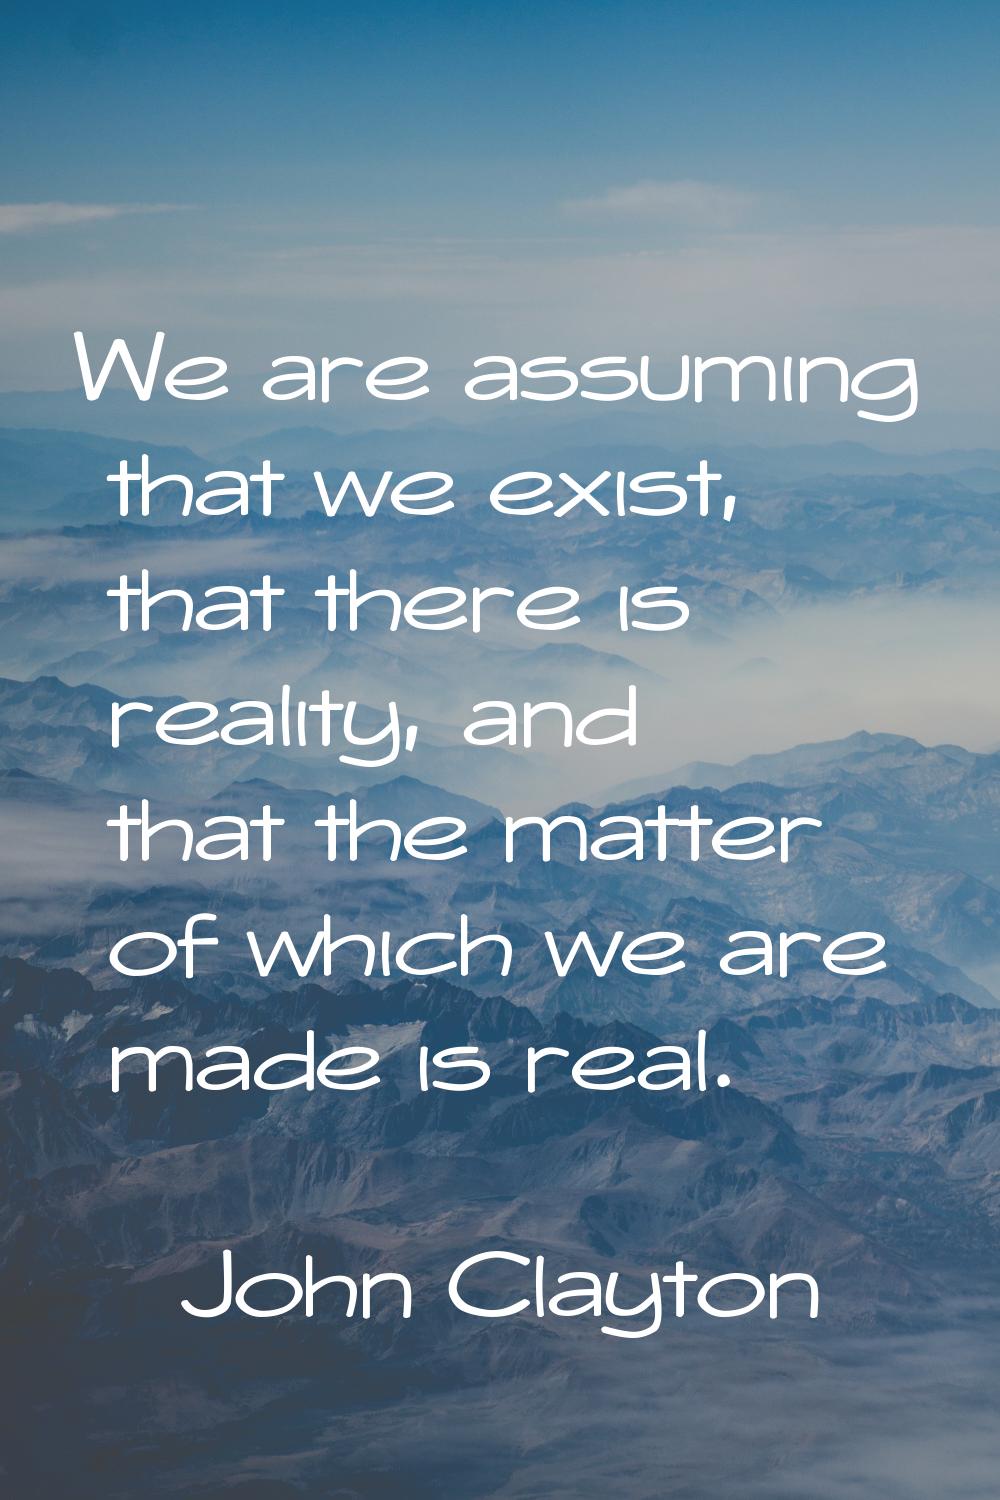 We are assuming that we exist, that there is reality, and that the matter of which we are made is r